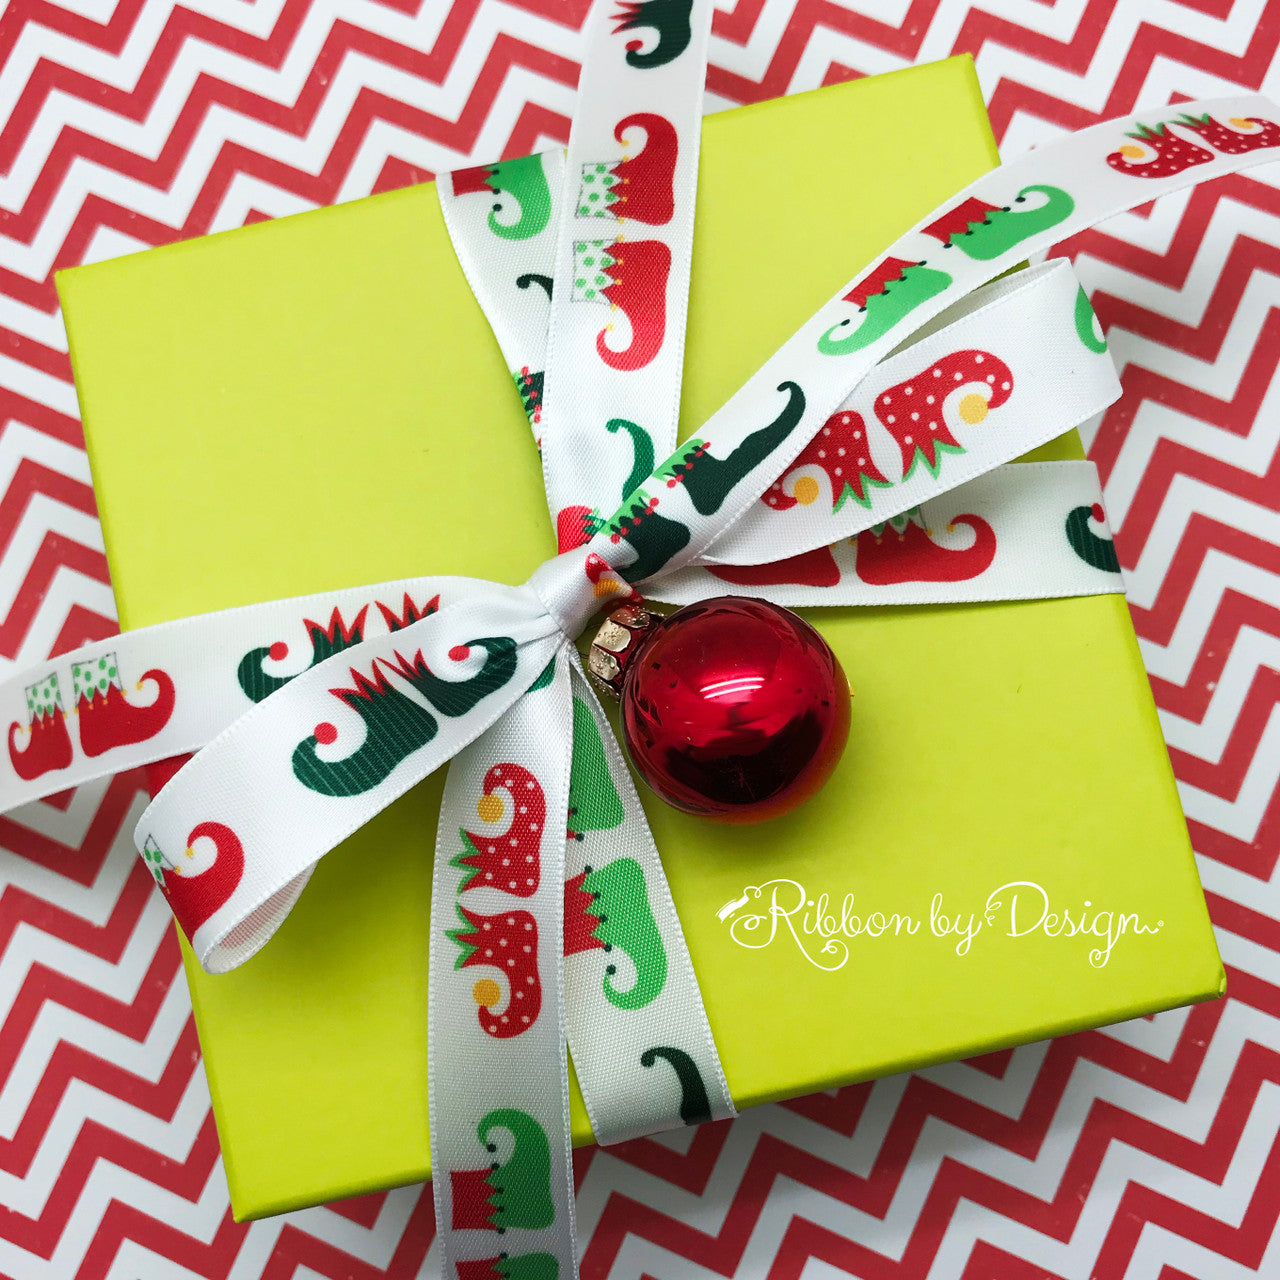 These sweet little elf shoes are just the cutest tying a small box! No wrapping paper needed!